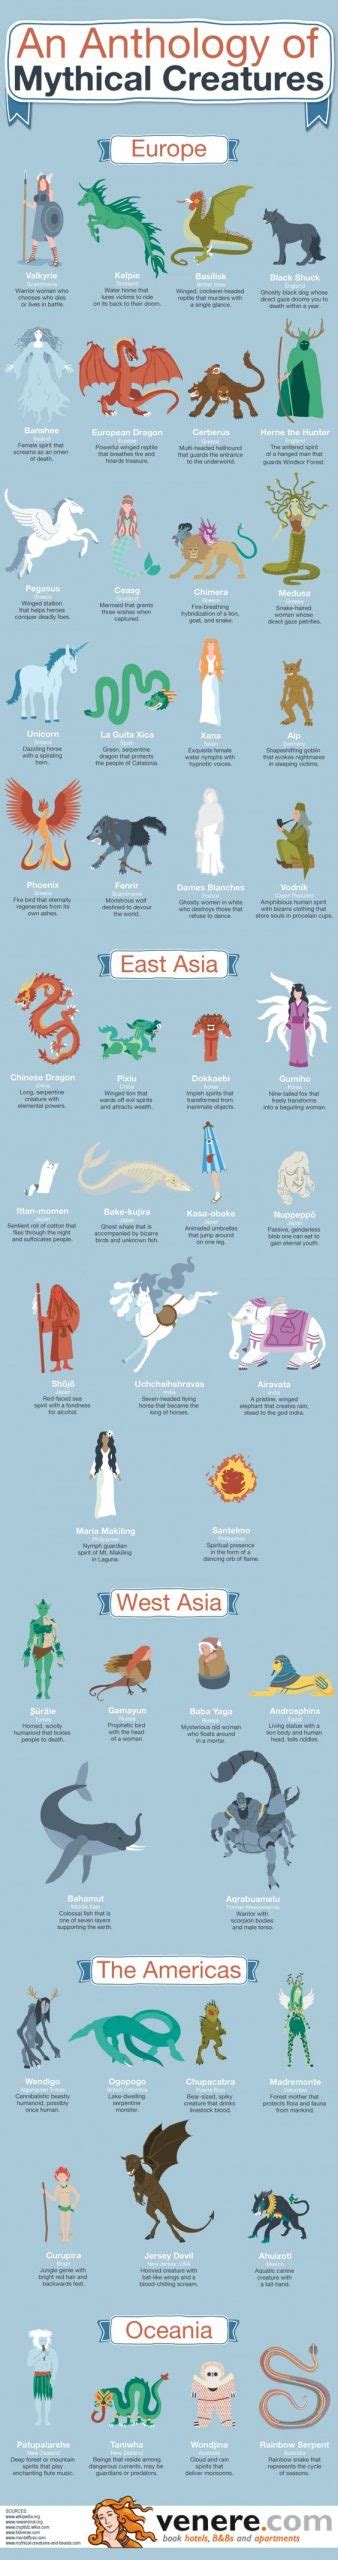 A Collection Of Mythical Creatures From Around The World Daily